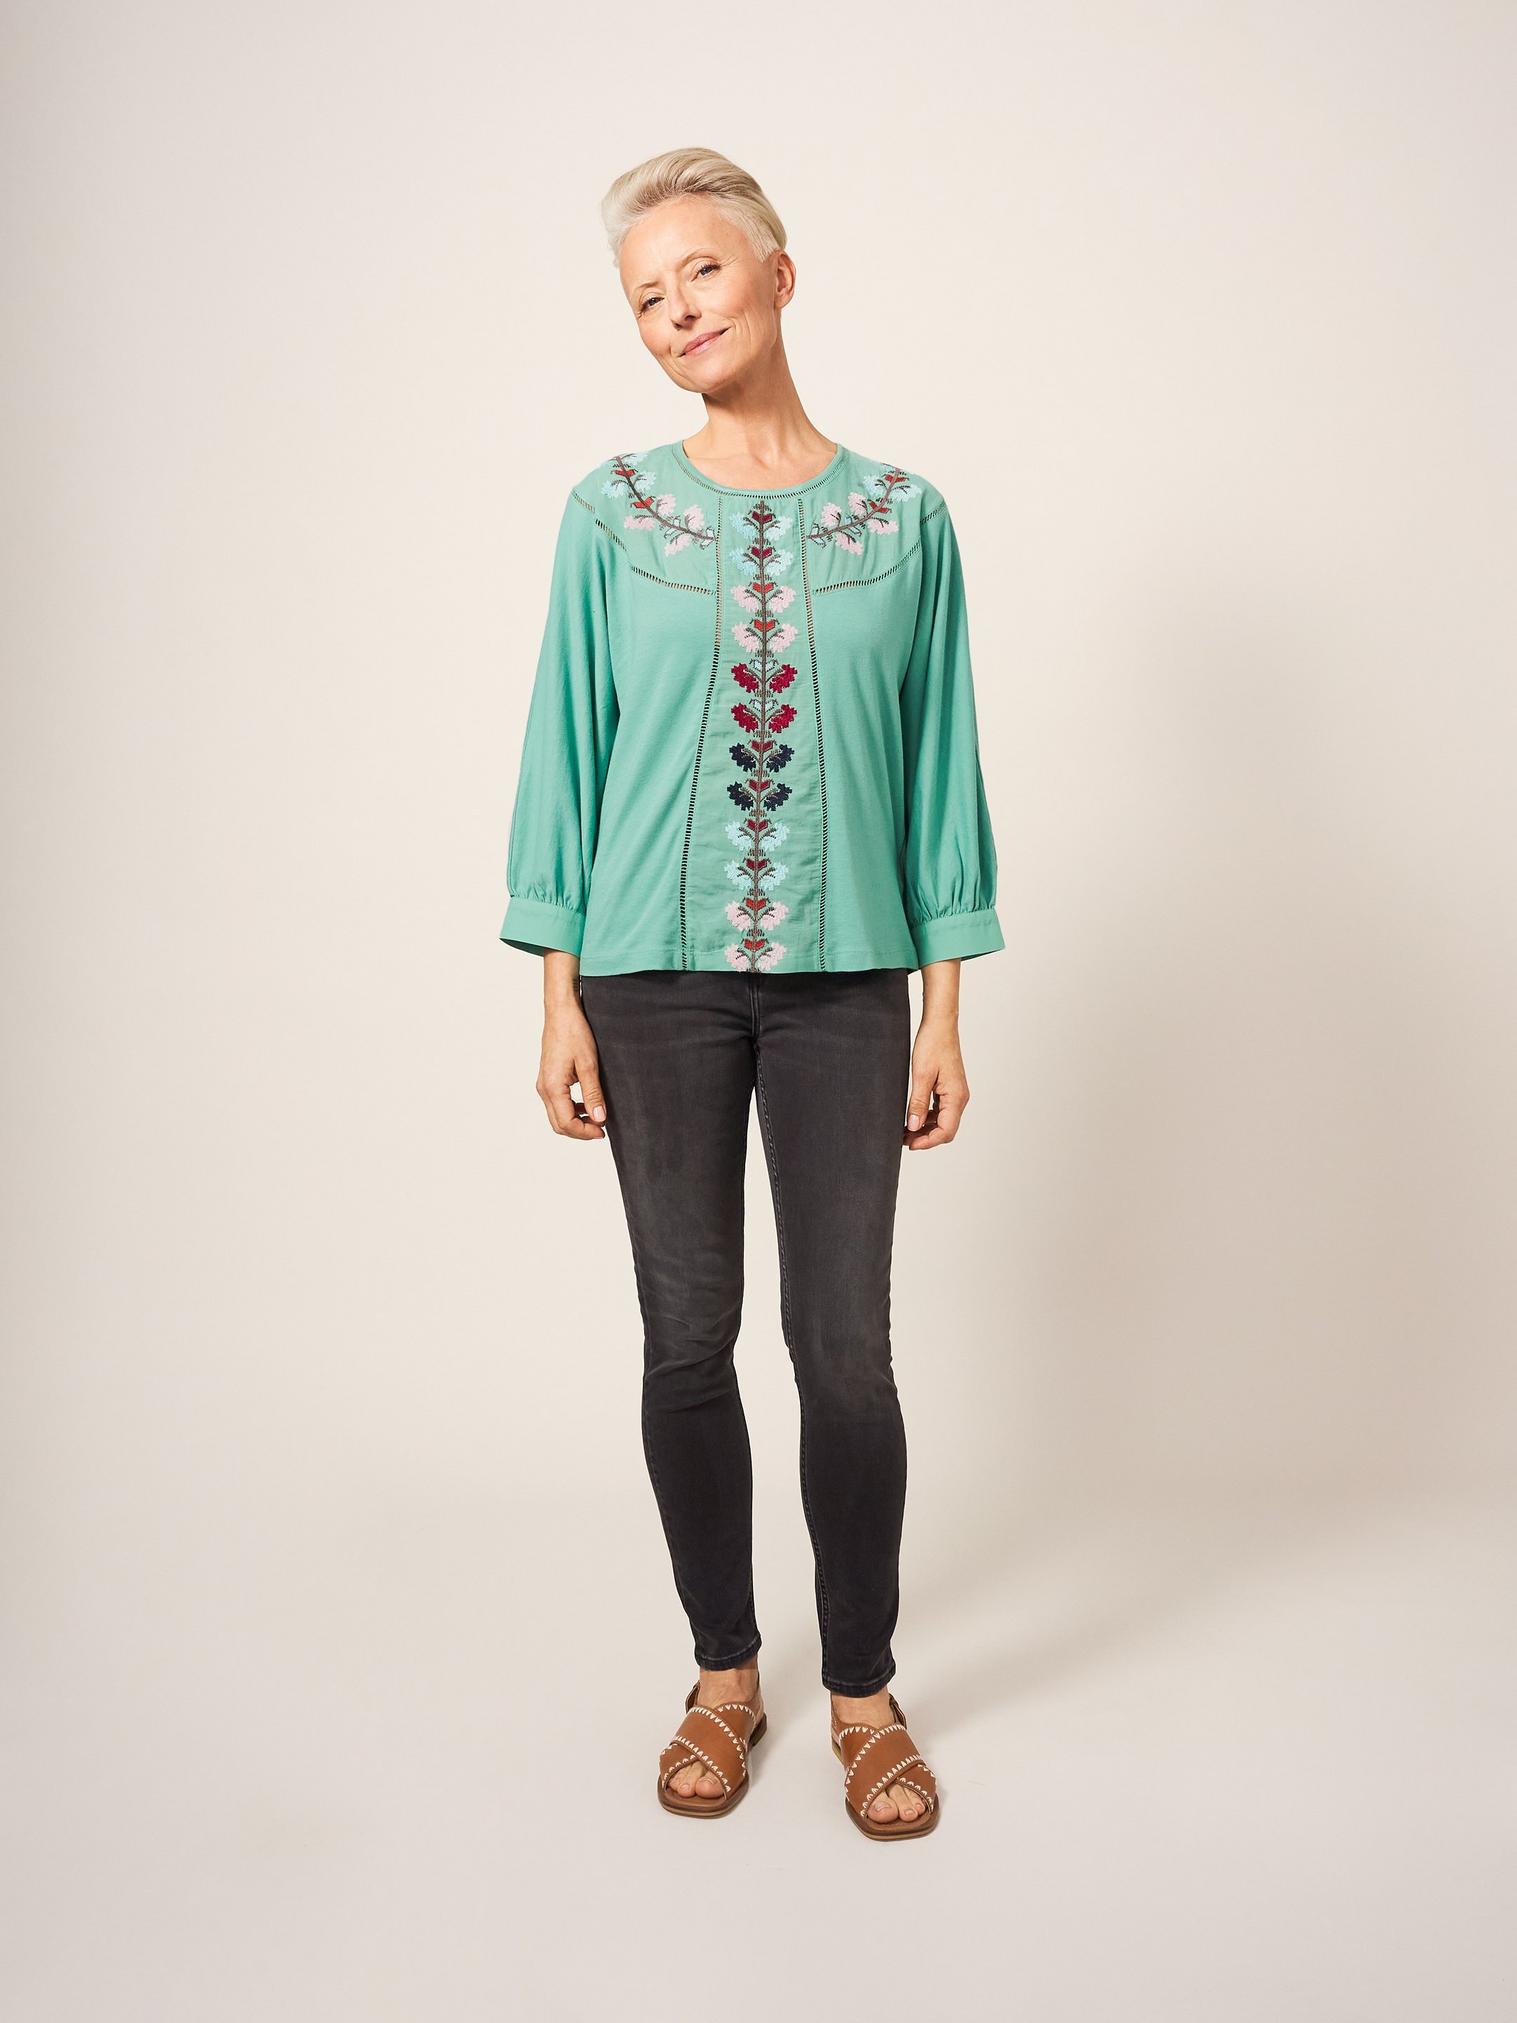 MOLLIE EMBROIDERED TOP in TEAL MLT - LIFESTYLE